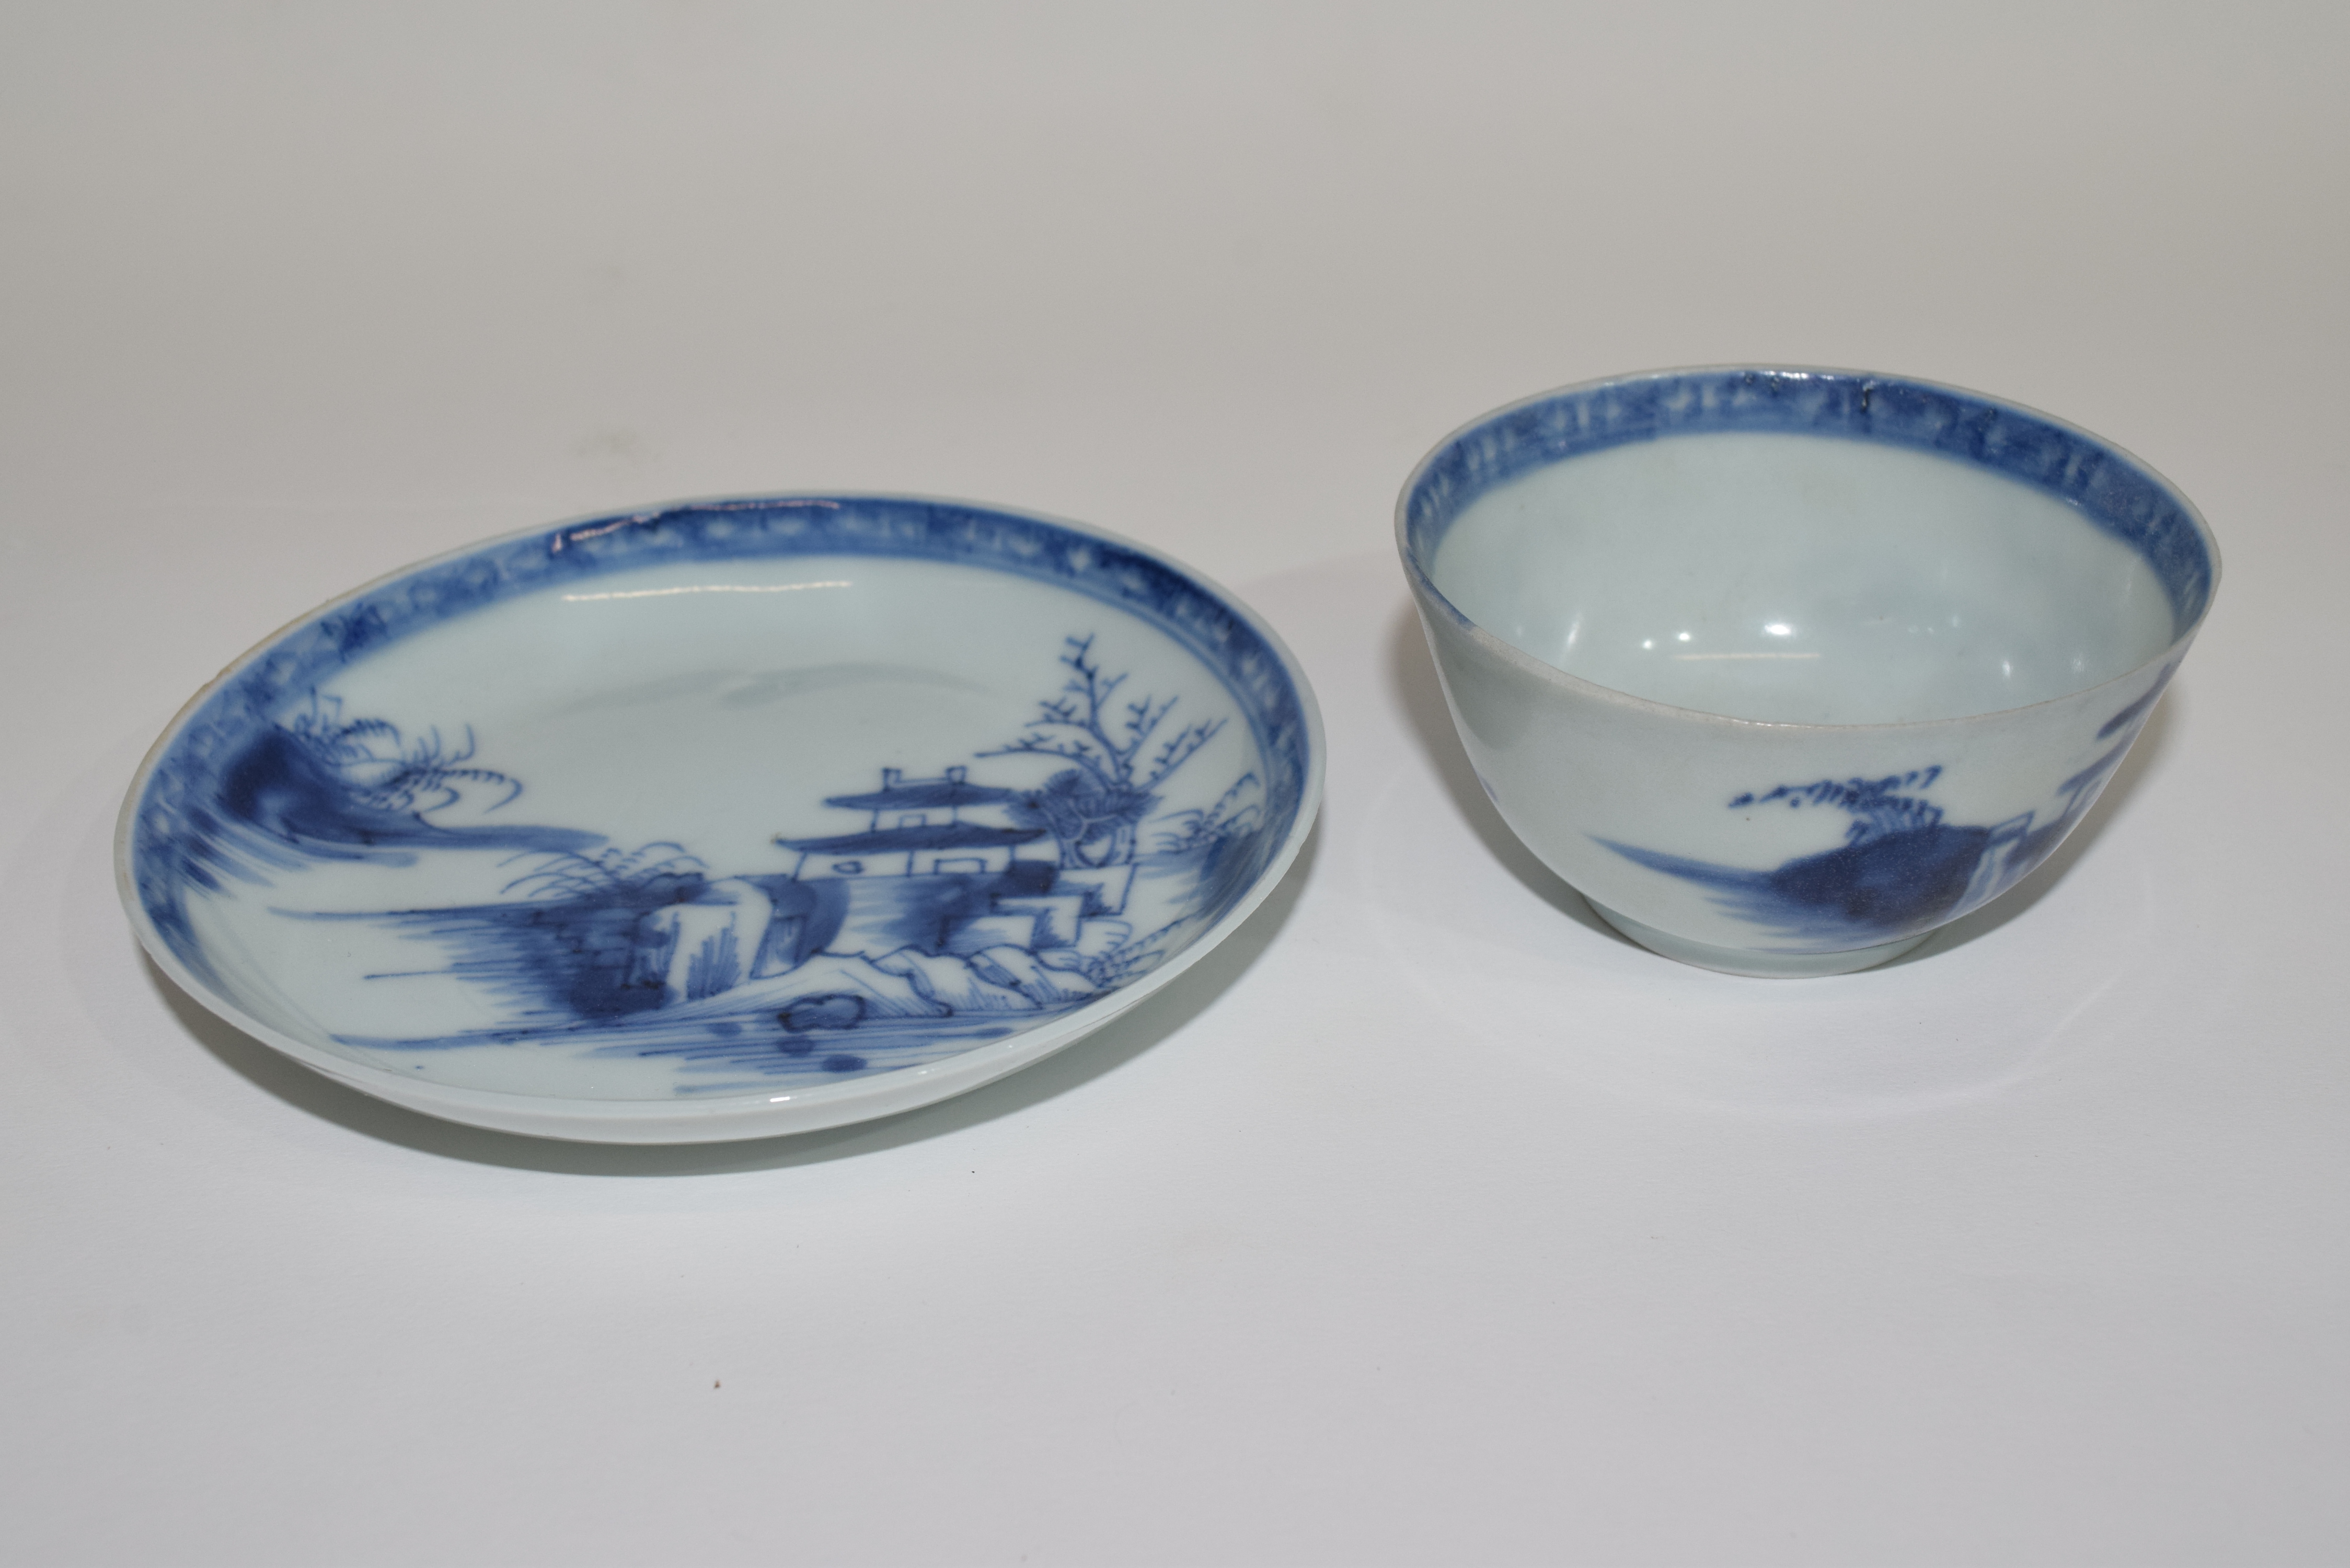 Nanking cargo blue and white tea bowl and saucer with sticker to base